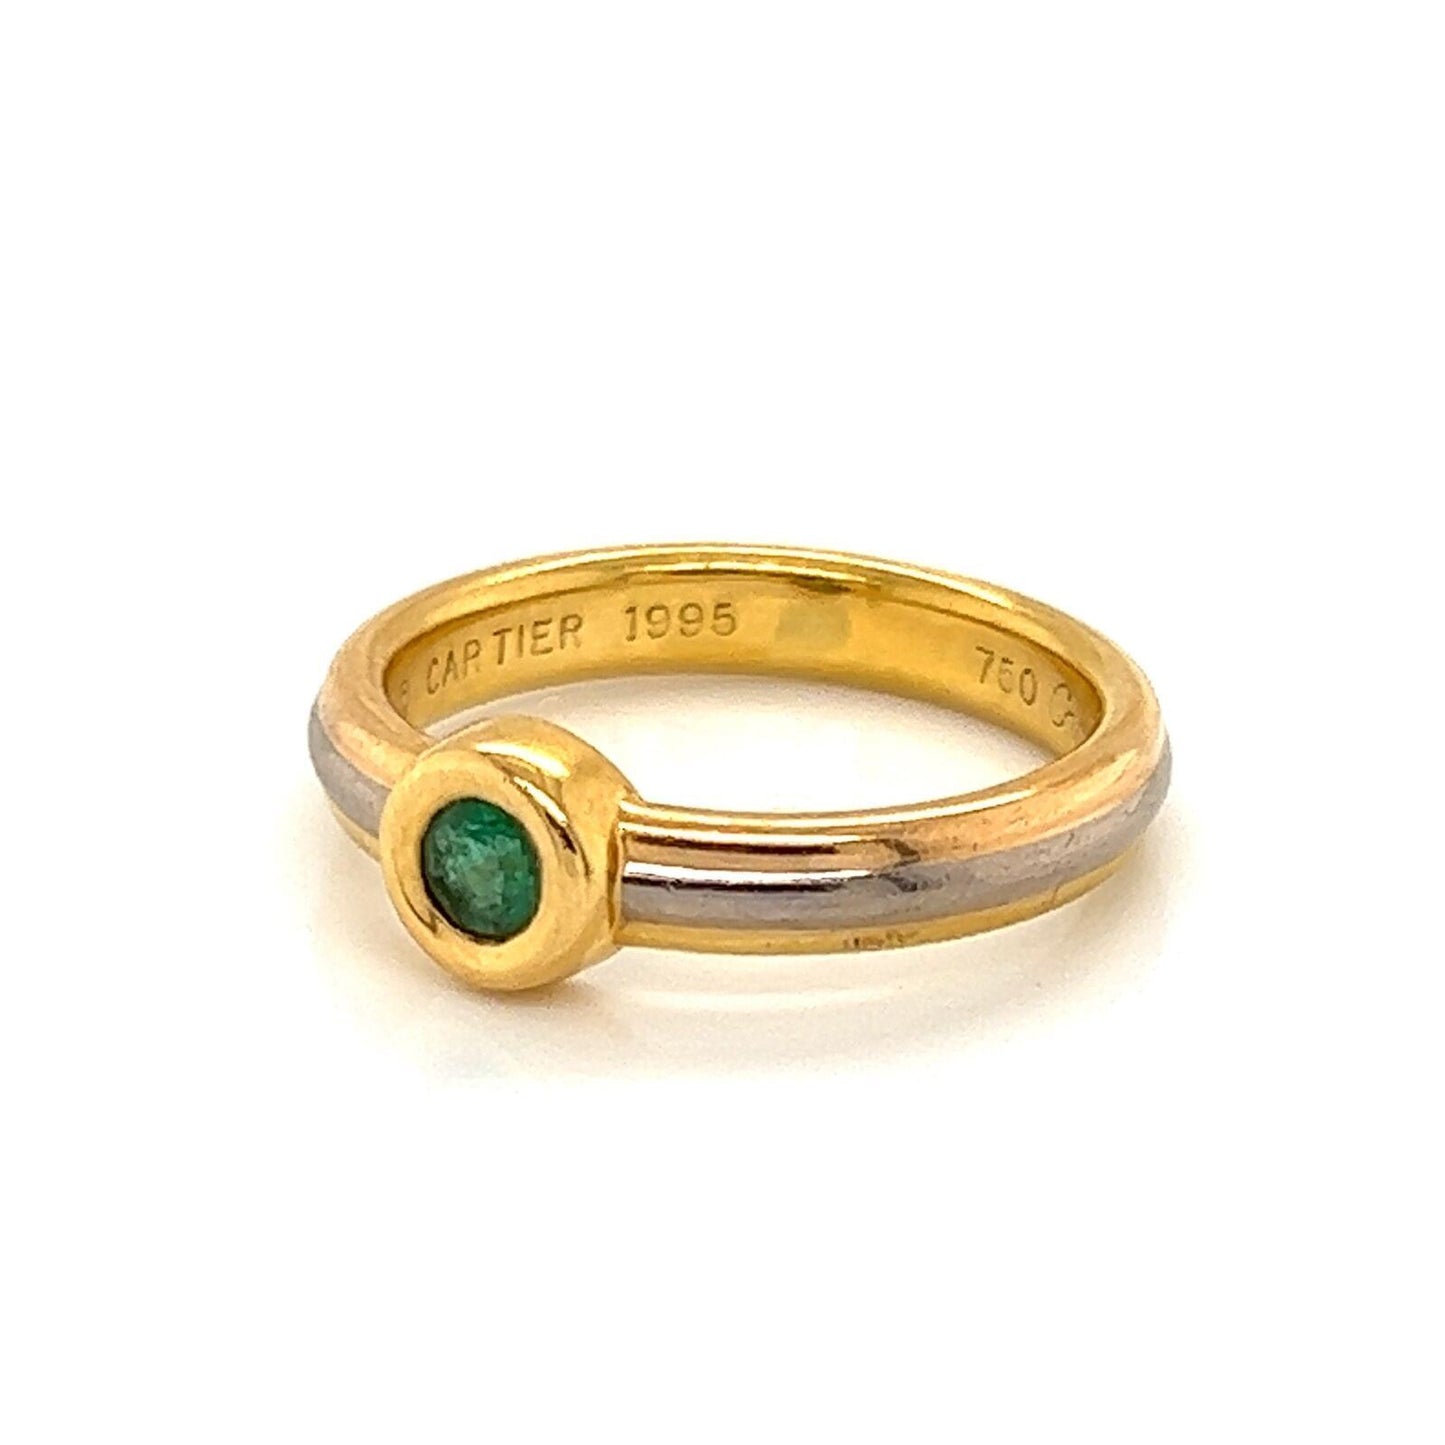 Cartier Trinity Emerald 18k Tri-Color Gold Stack Band Ring - Size 6